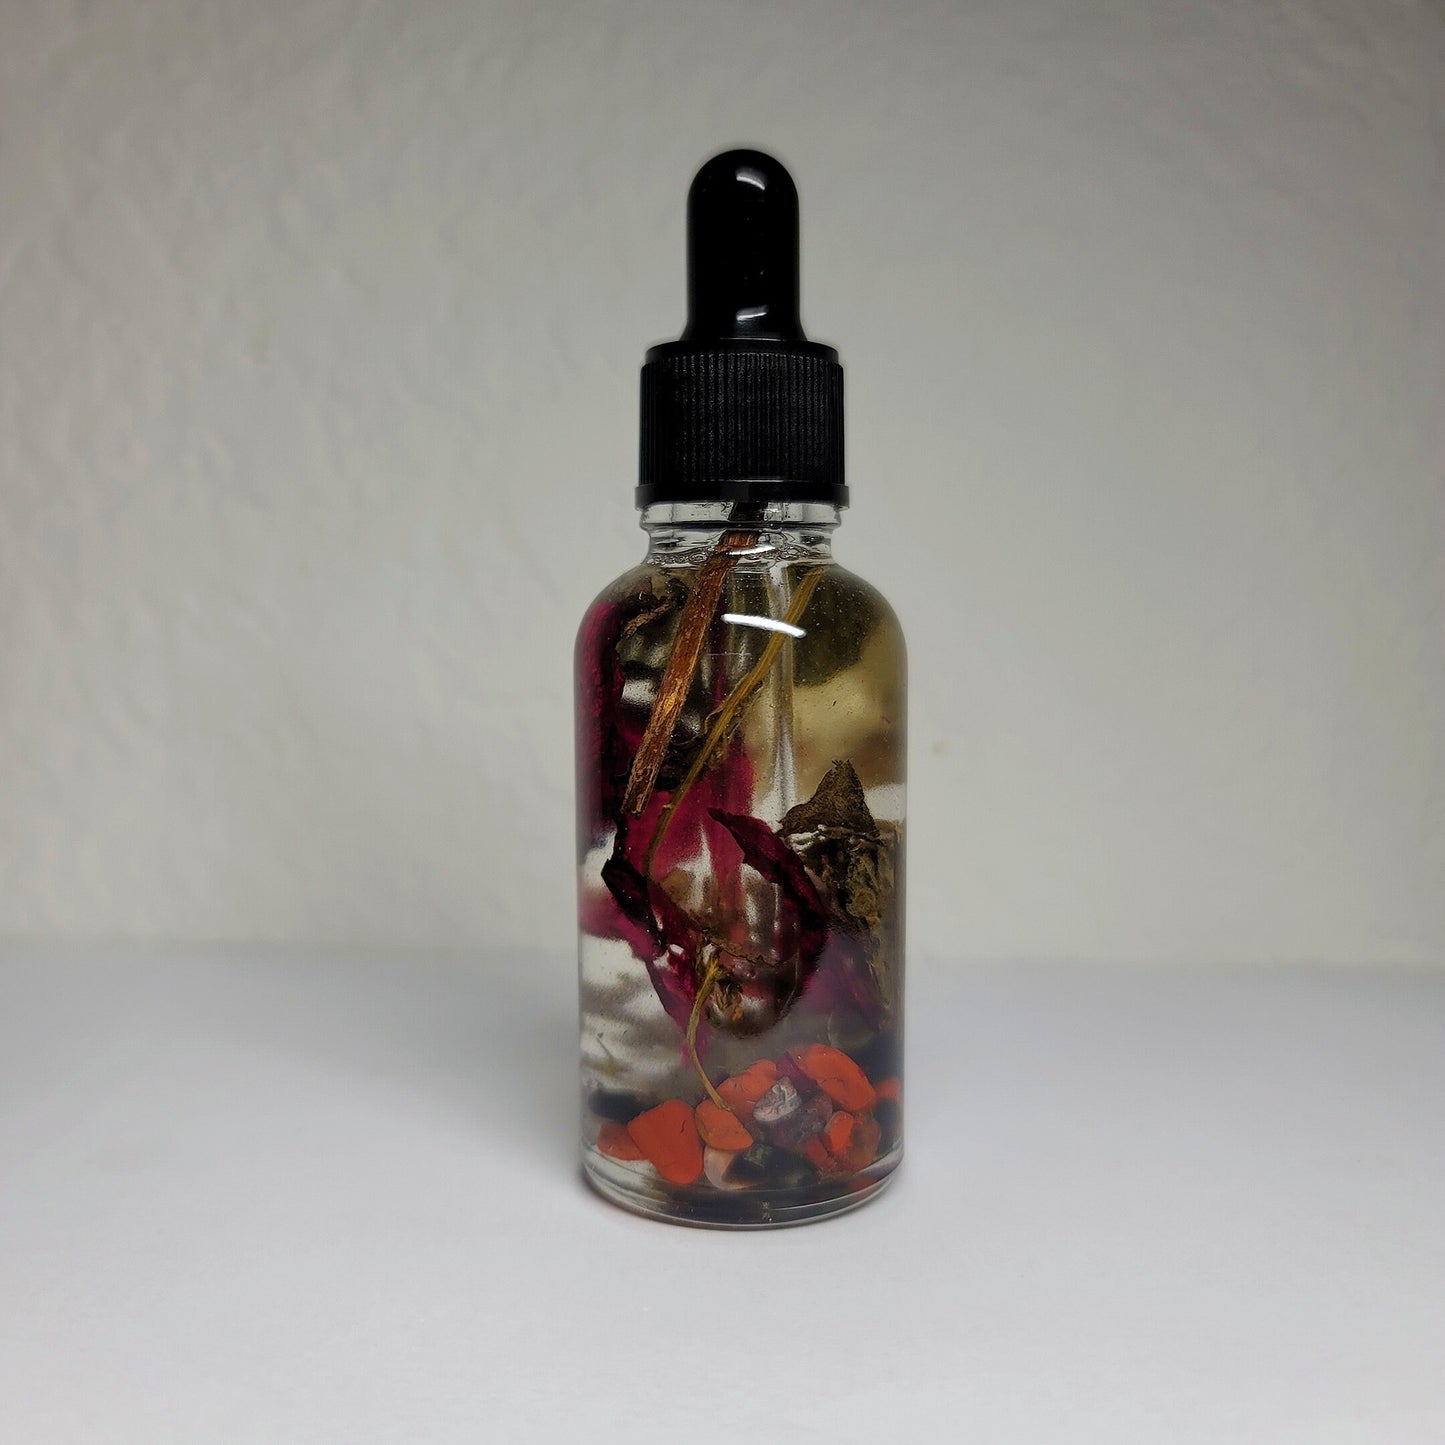 Lilith Dark Goddess Oil | Ritual & Spell Work, Altars, Invocation, Manifestation, and Intentions